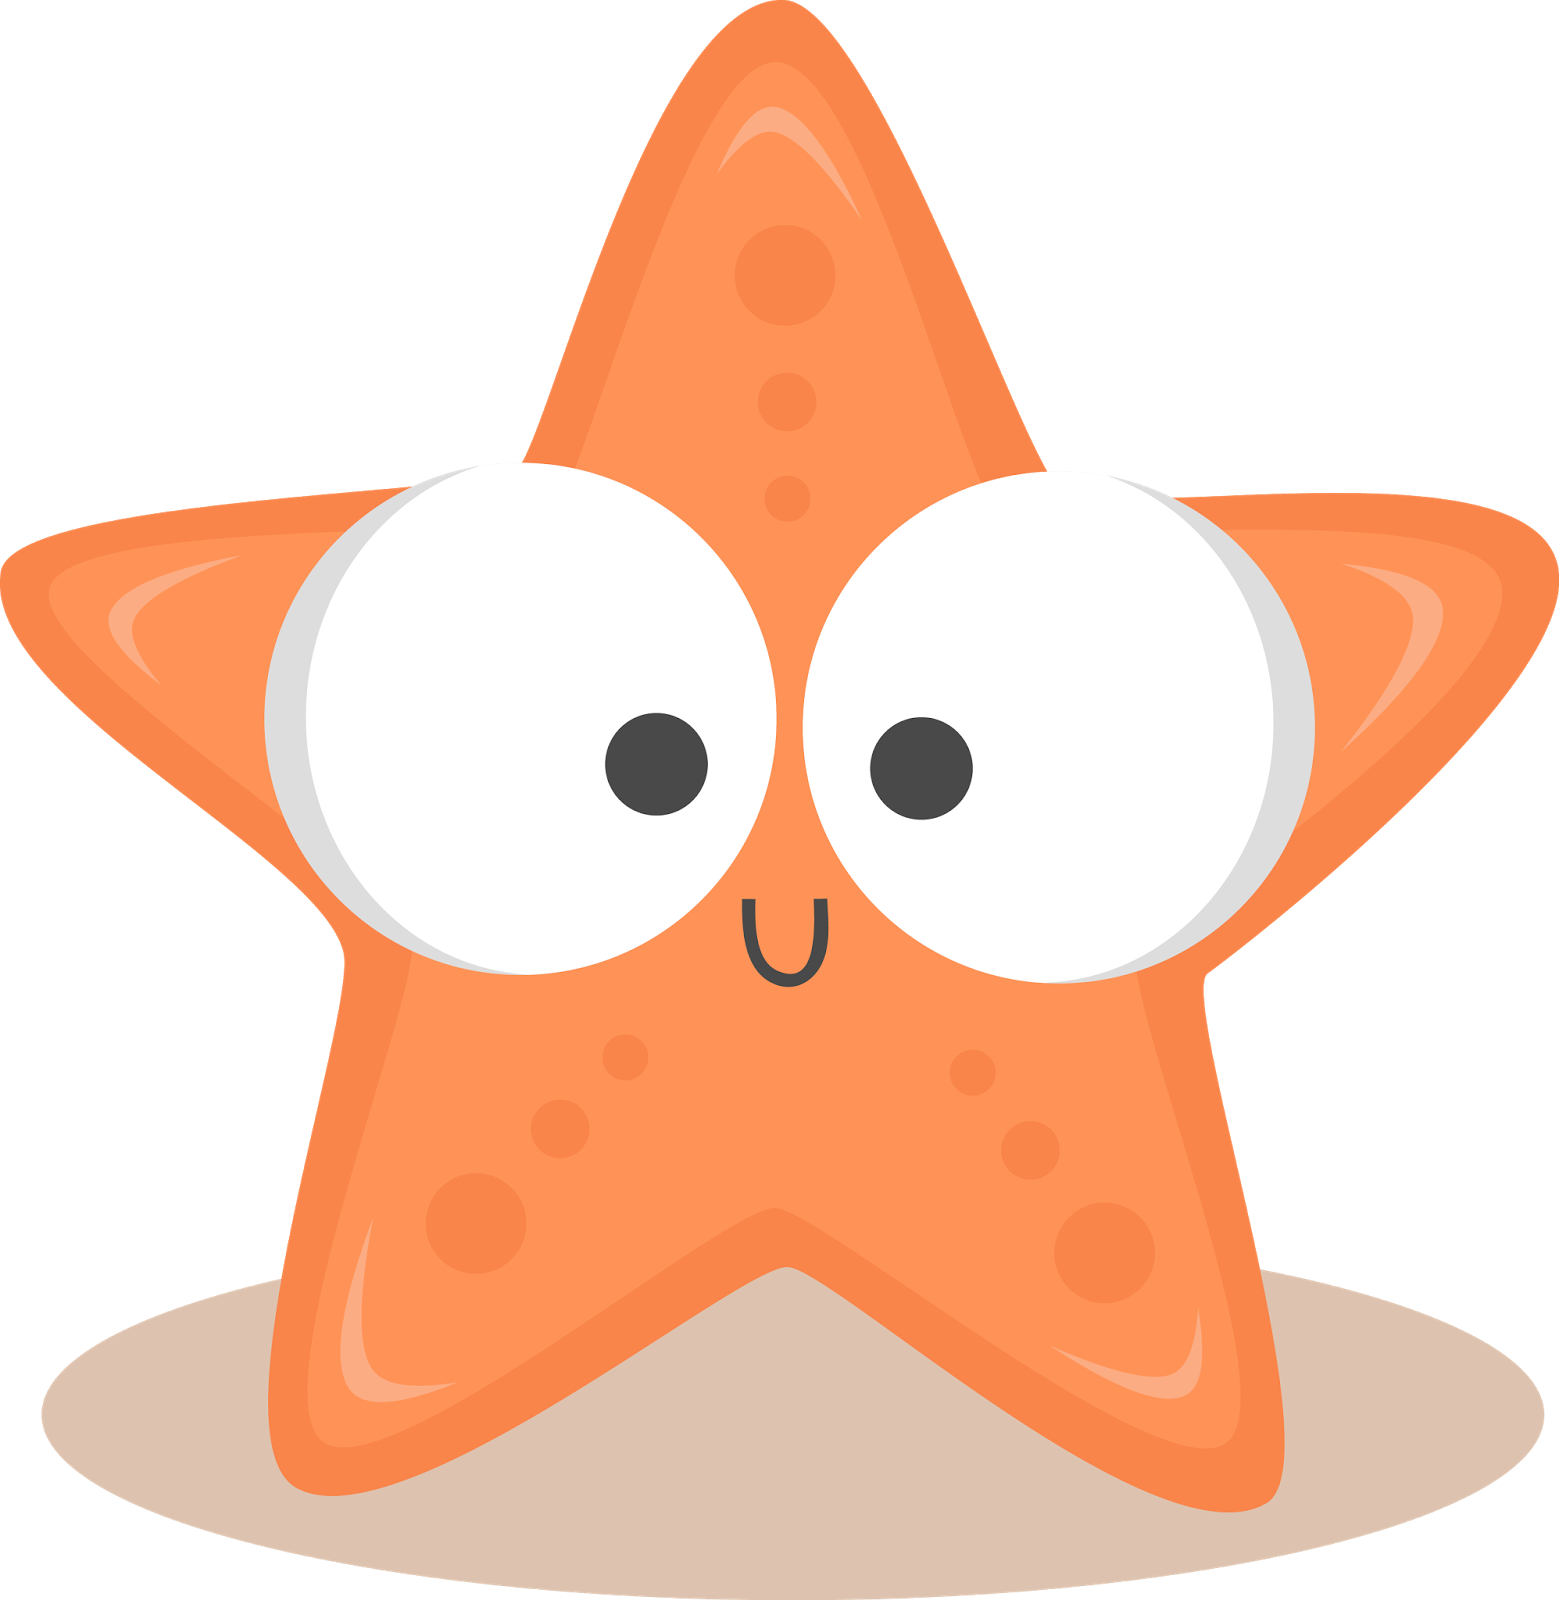 A Cartoon Starfish With Eyes And Mouth